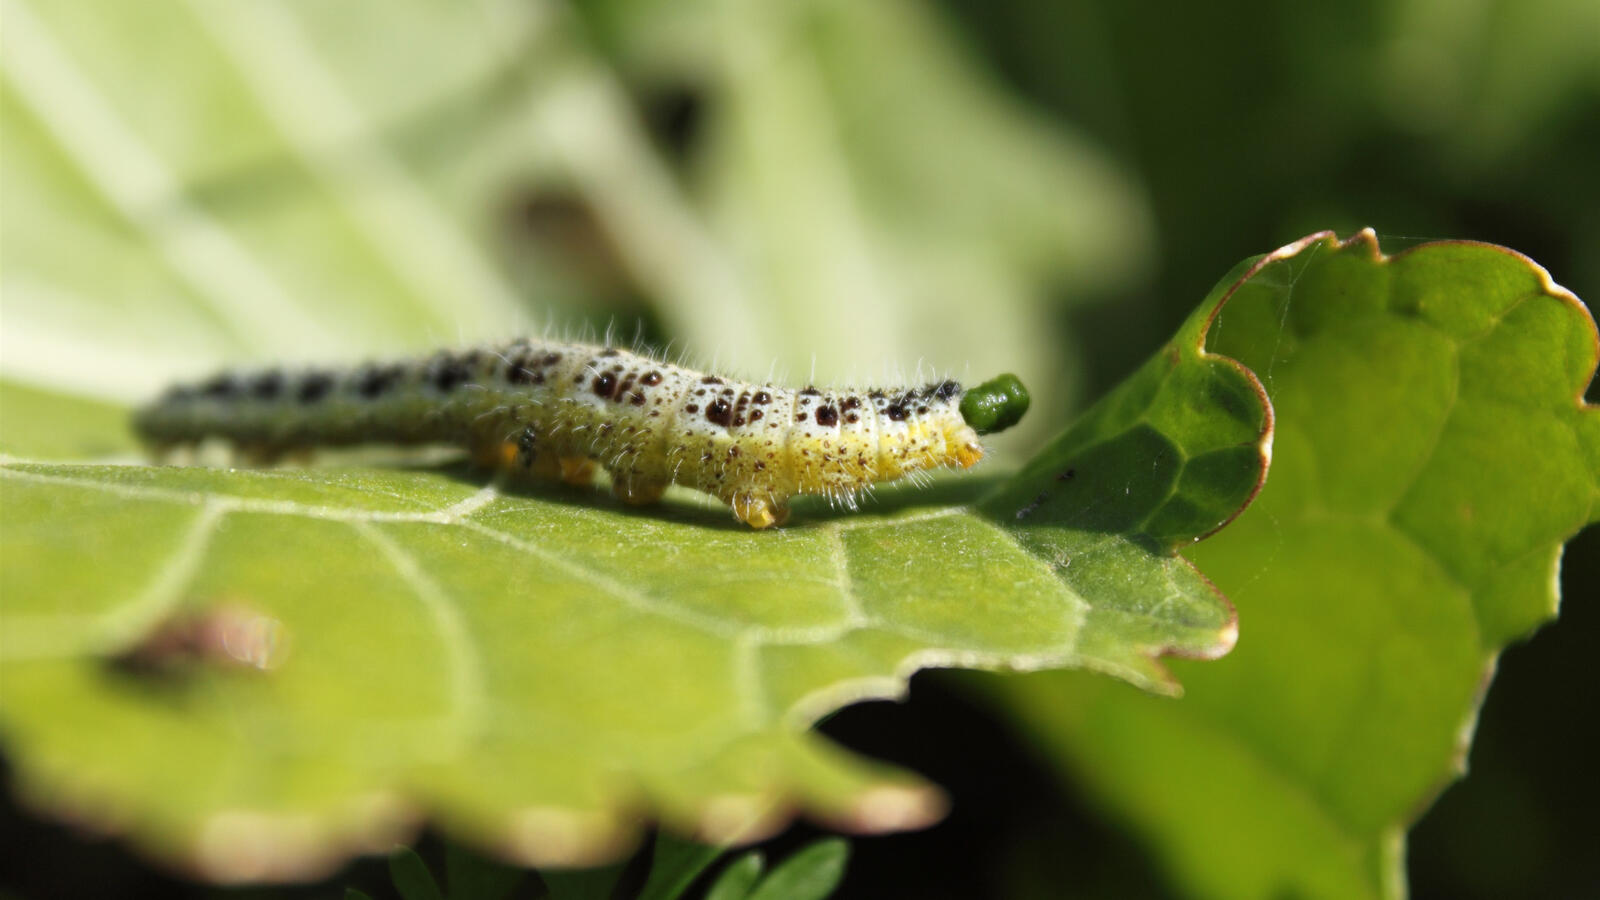 Wallpapers wallpaper caterpillar reptile insects on the desktop